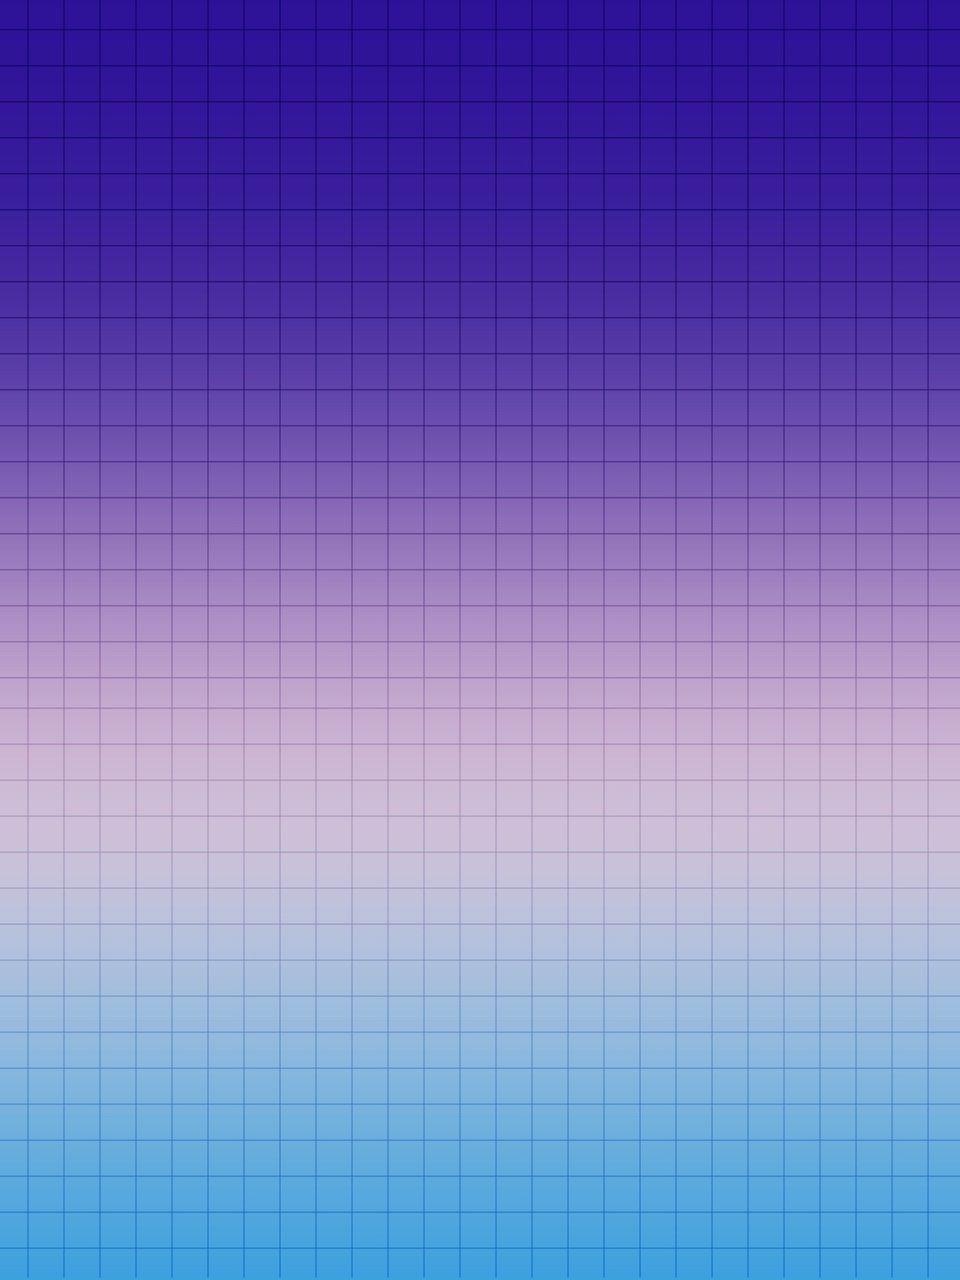 Grid Aesthetic Wallpapers - Top Free Grid Aesthetic Backgrounds